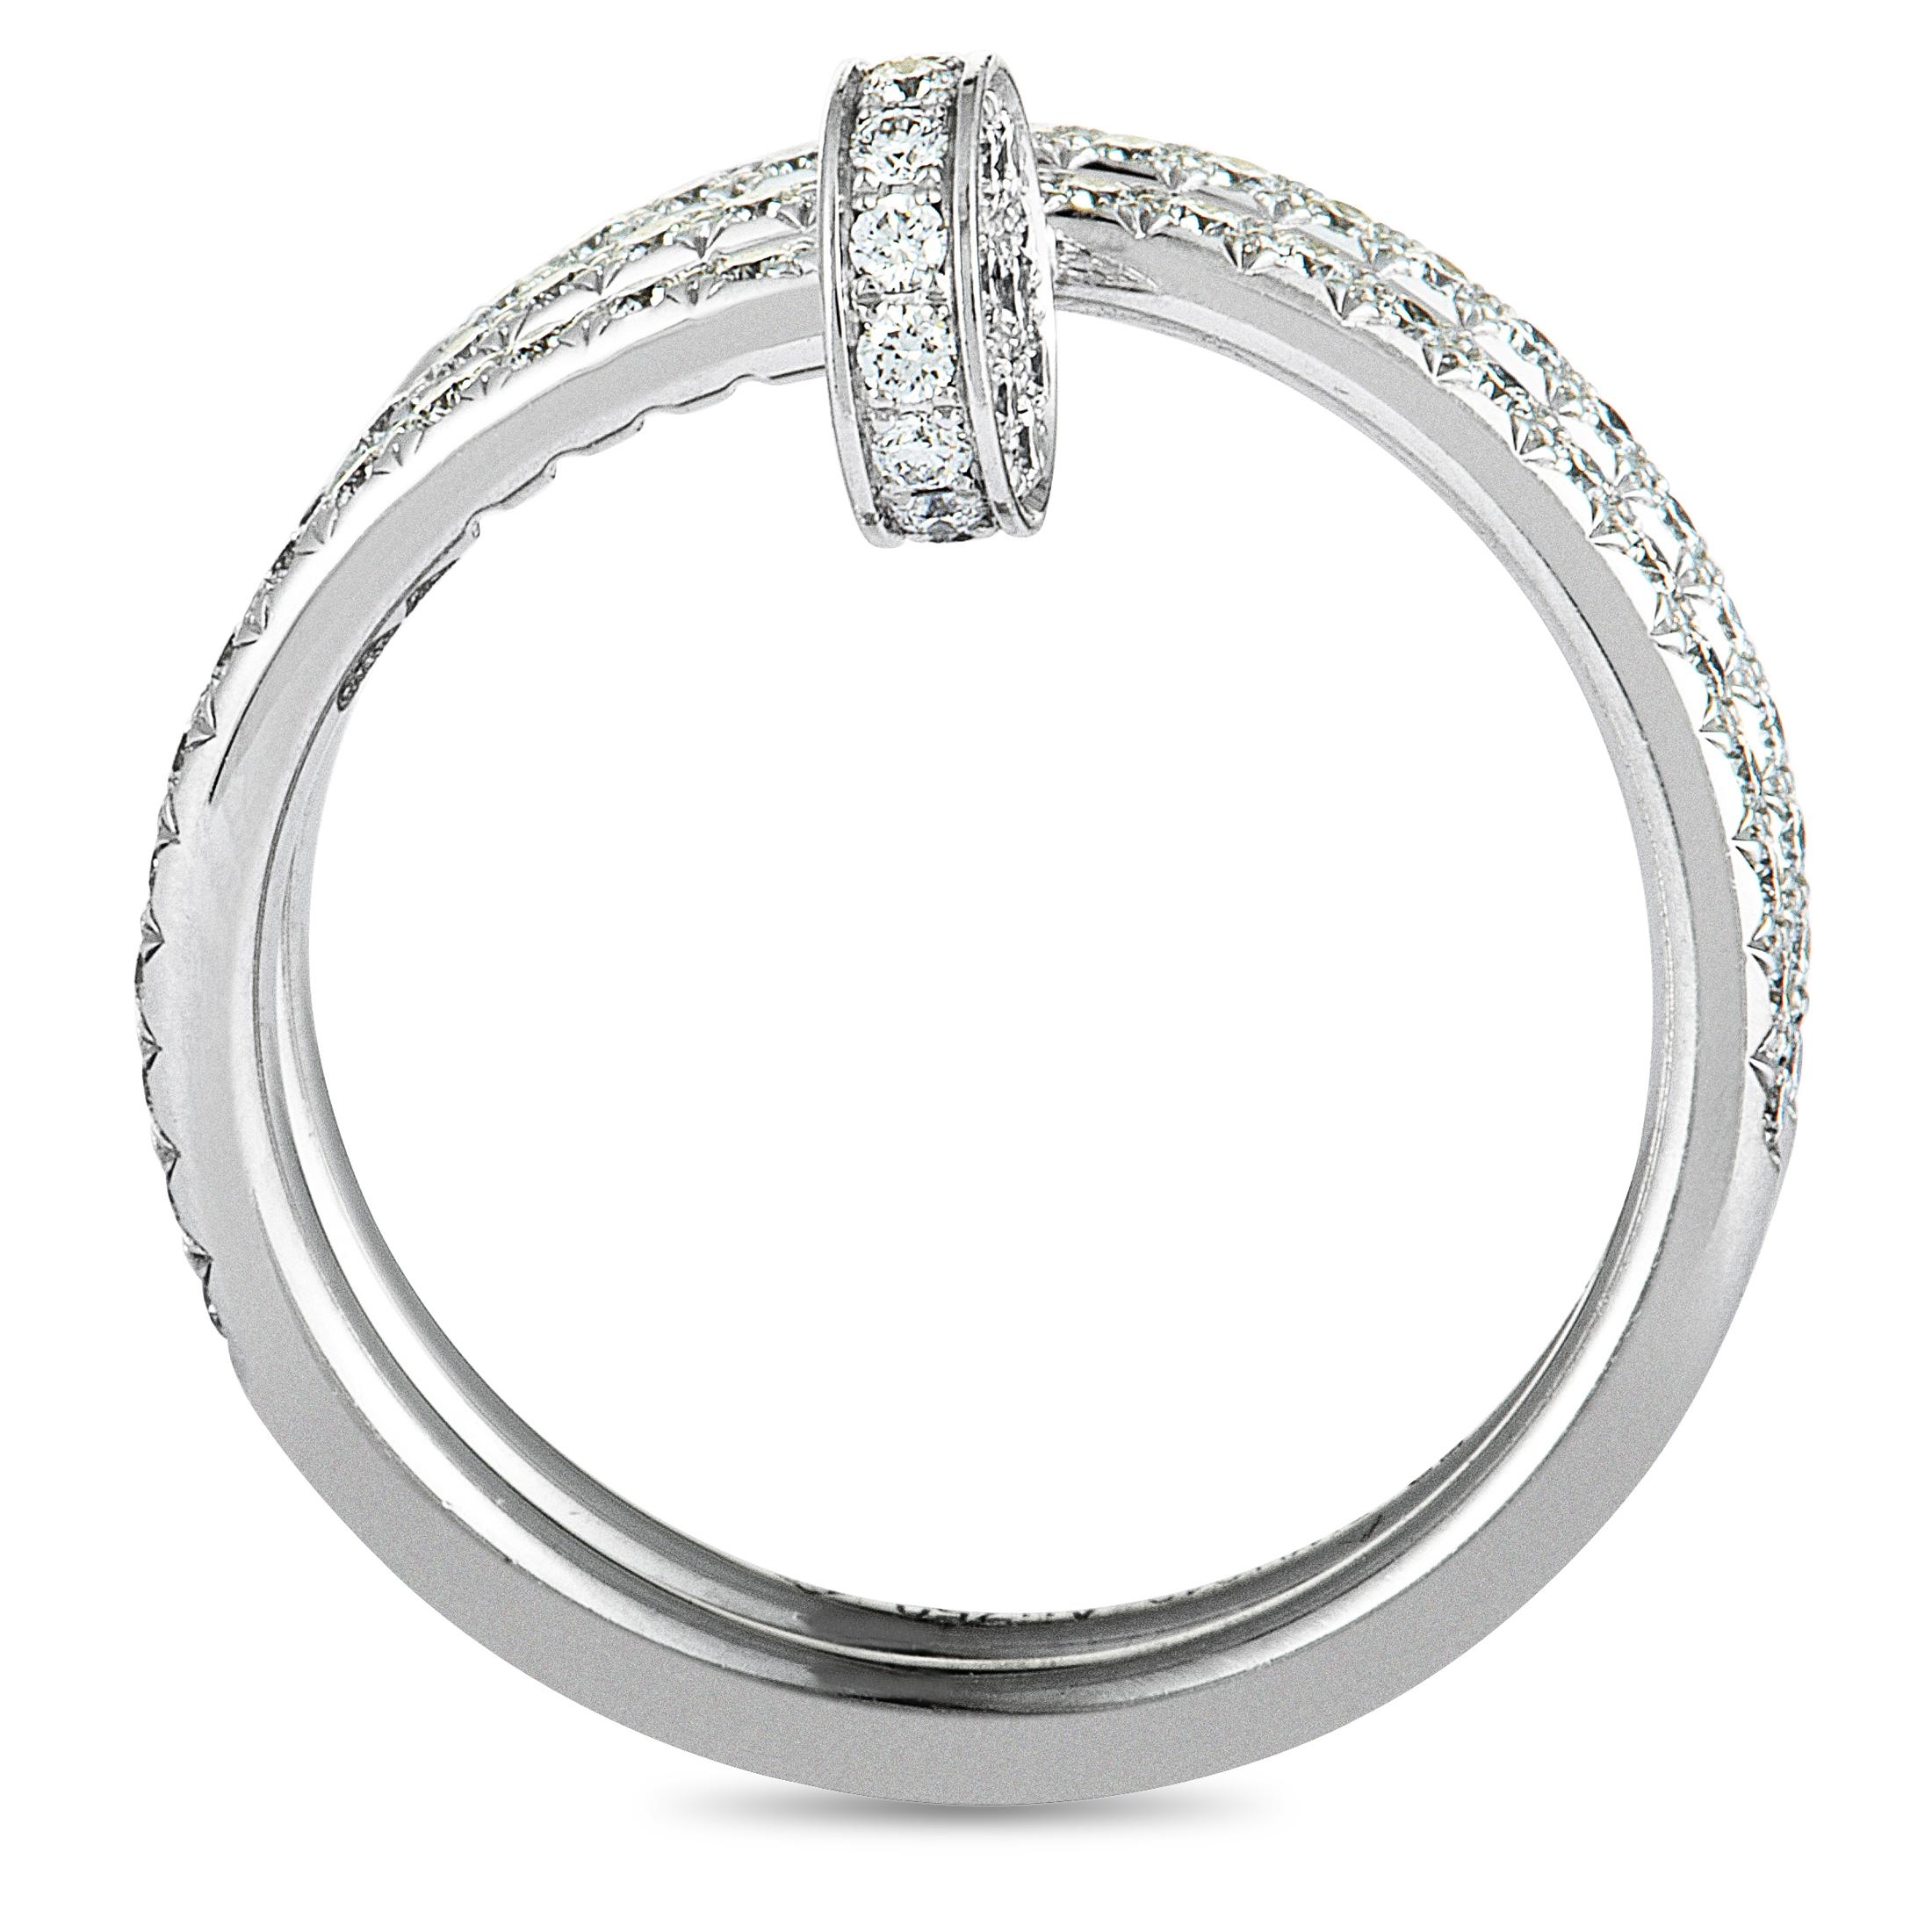 This luxurious ring is presented within the renowned “Juste un Clou” collection by Cartier and it takes the form of a long nail that elegantly hugs your finger. The ring is made of 18K white gold and it is embellished with scintillating diamonds